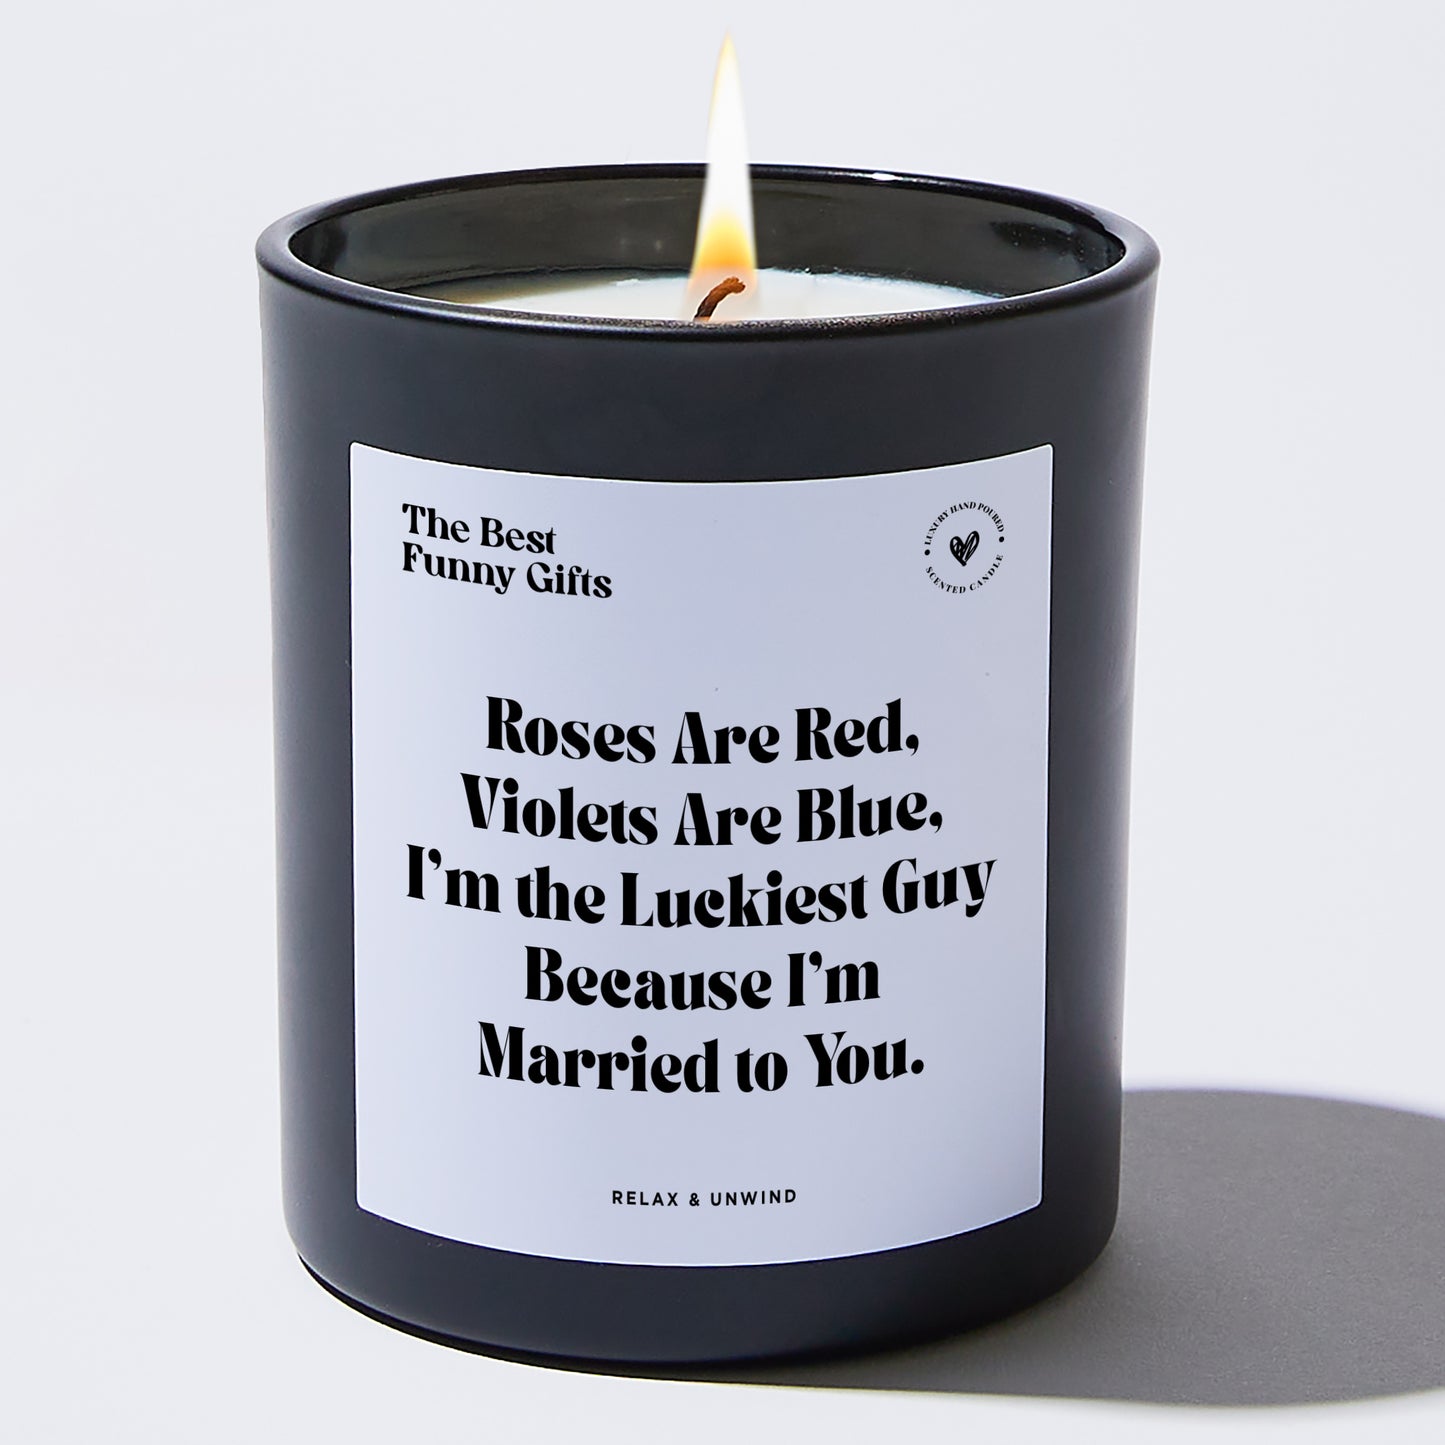 Anniversary Roses Are Red, Violets Are Blue, I'm the Luckiest Guy Because I'm Married to You. - The Best Funny Gifts